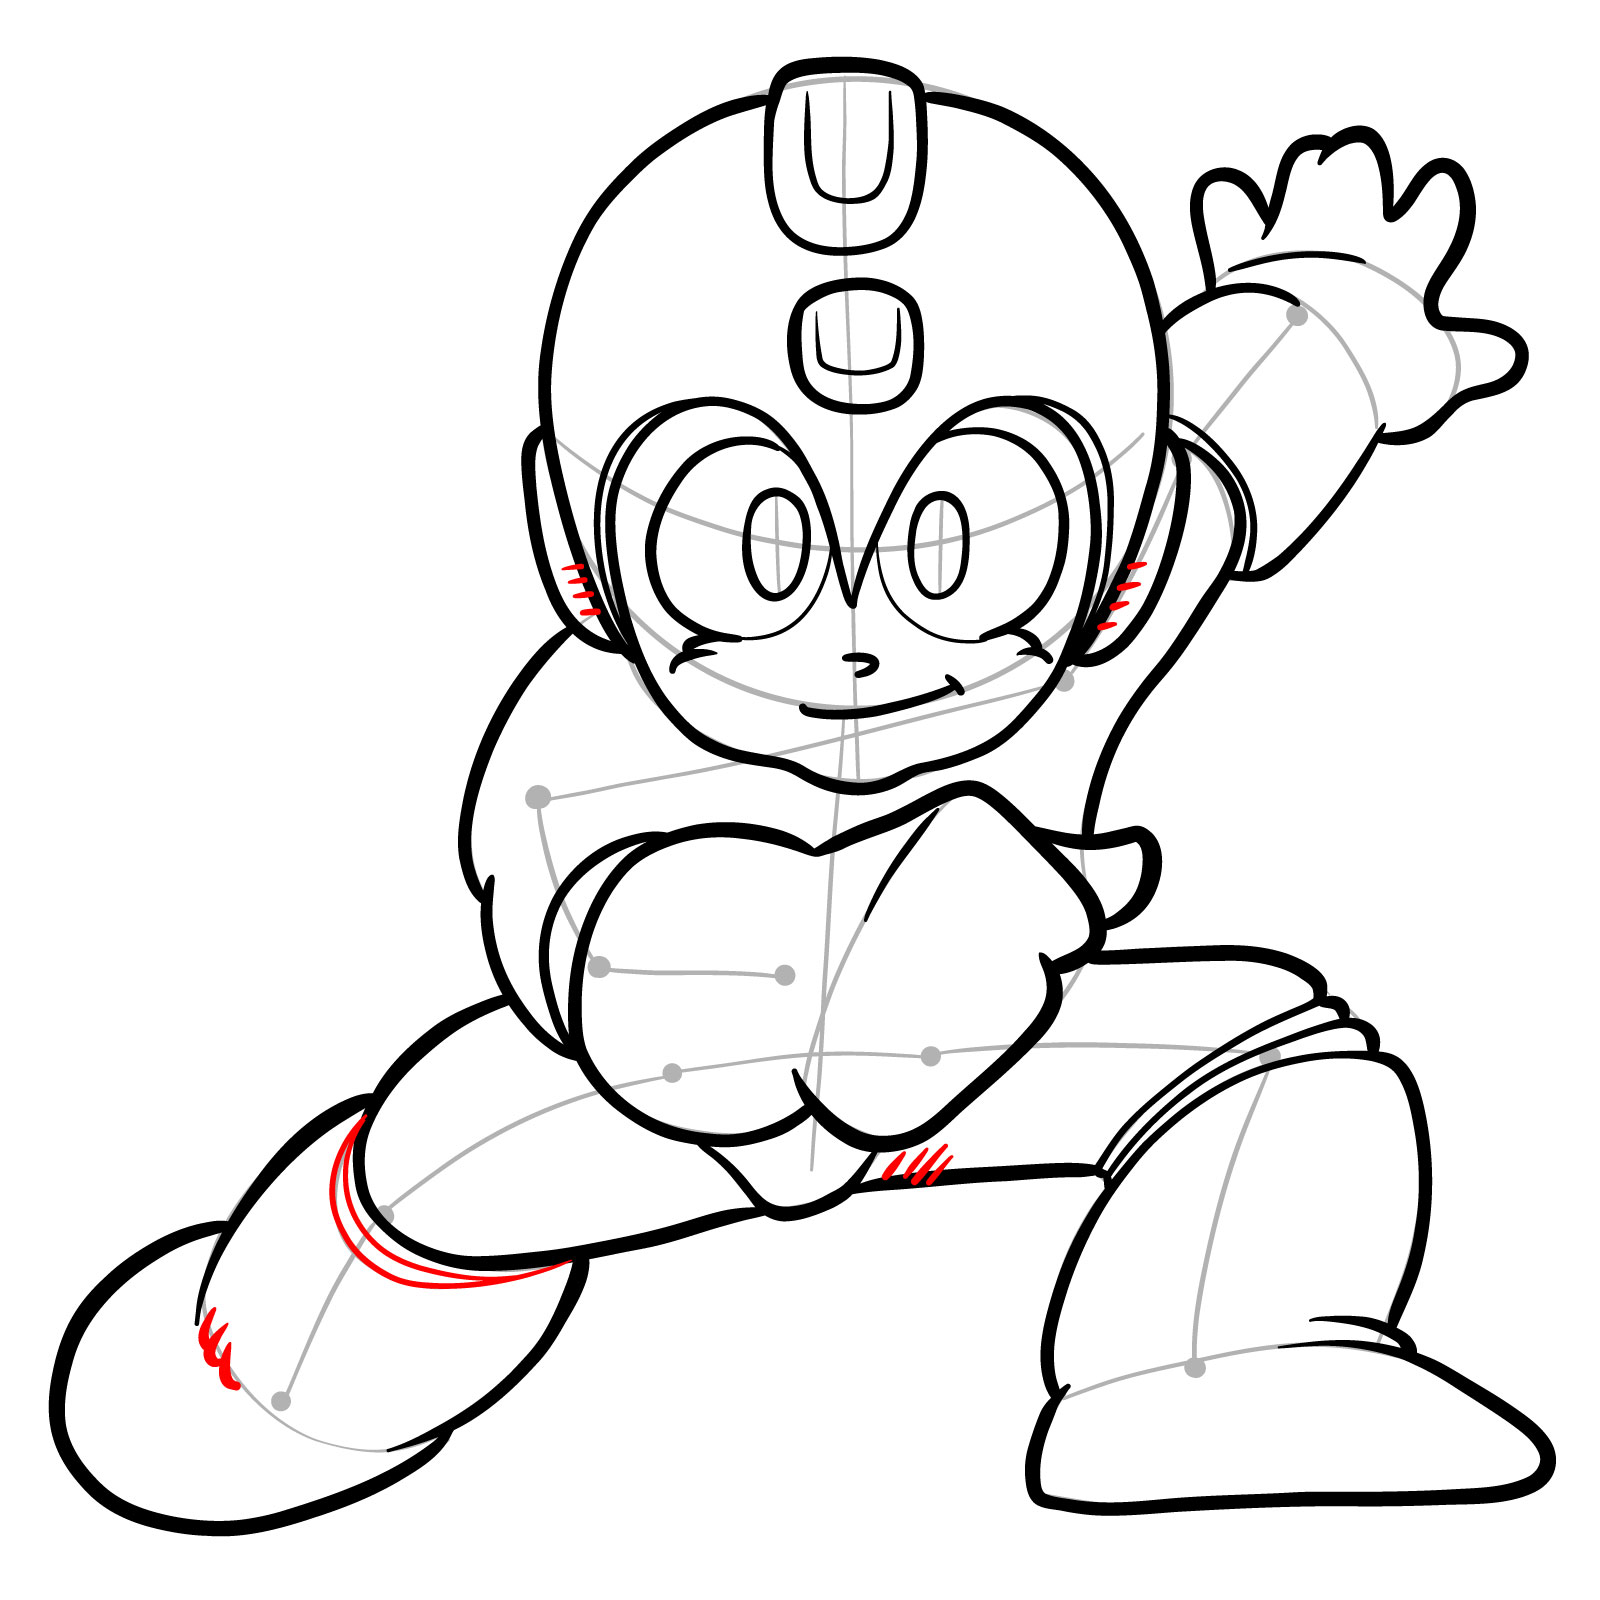 How to draw Mega Man from the original game - step 25